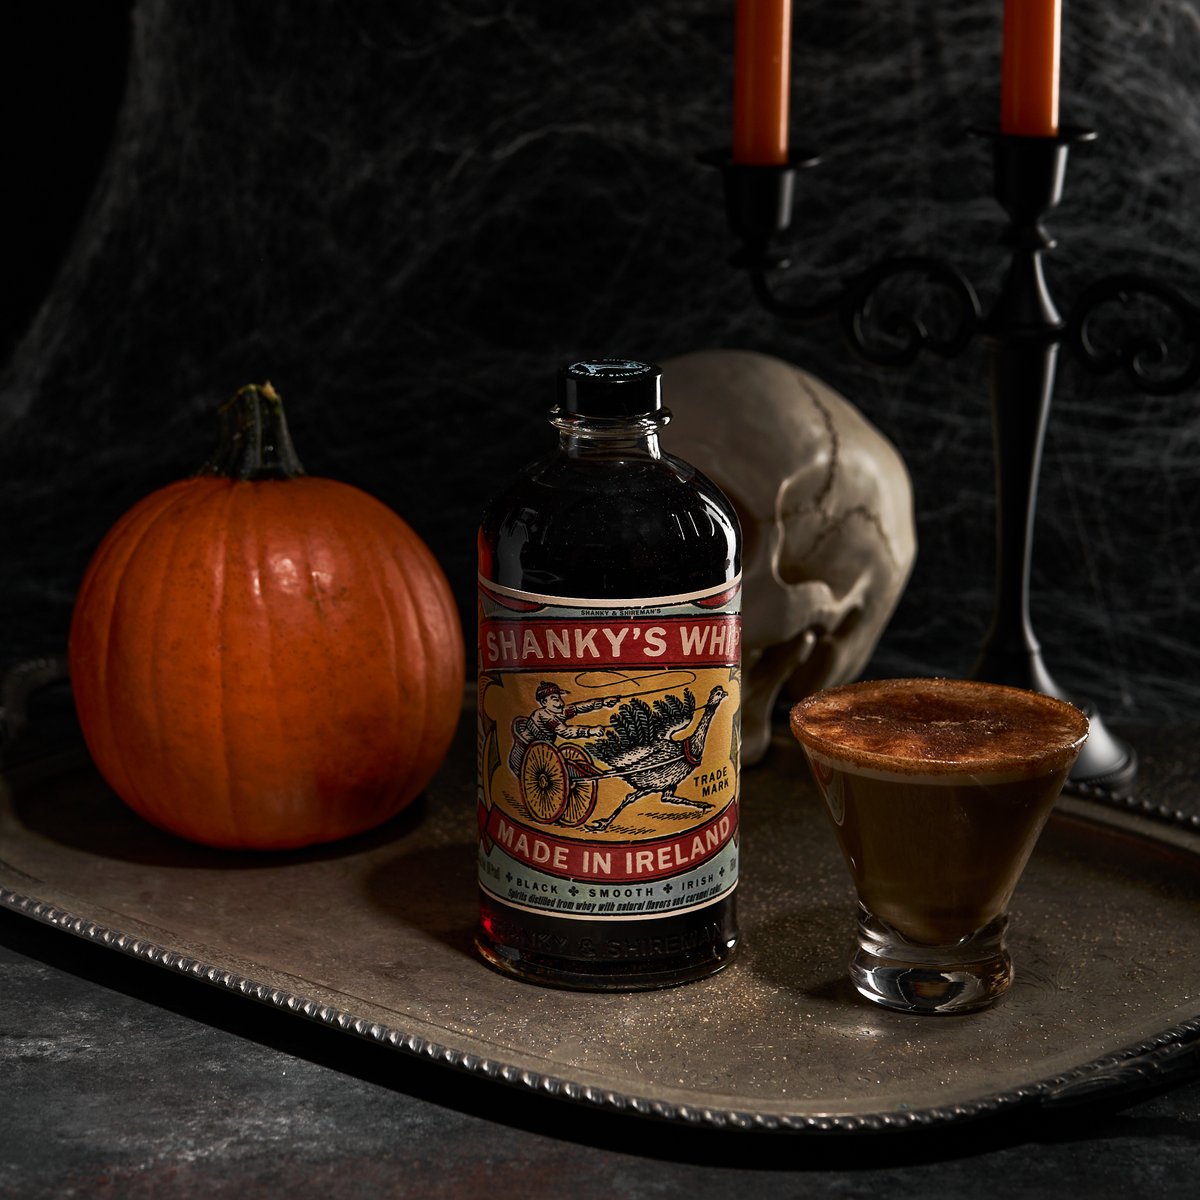 Shanky's Whip will have you ready for Halloween. Why not try the Whip or Treat?

-1 Part Shanky's Whip
-1 Part Pumpkin Coffee or Cold Brew
-Top with Whipped Cream and Cinnamon Sugar
#biggarandleith #shankyswhip